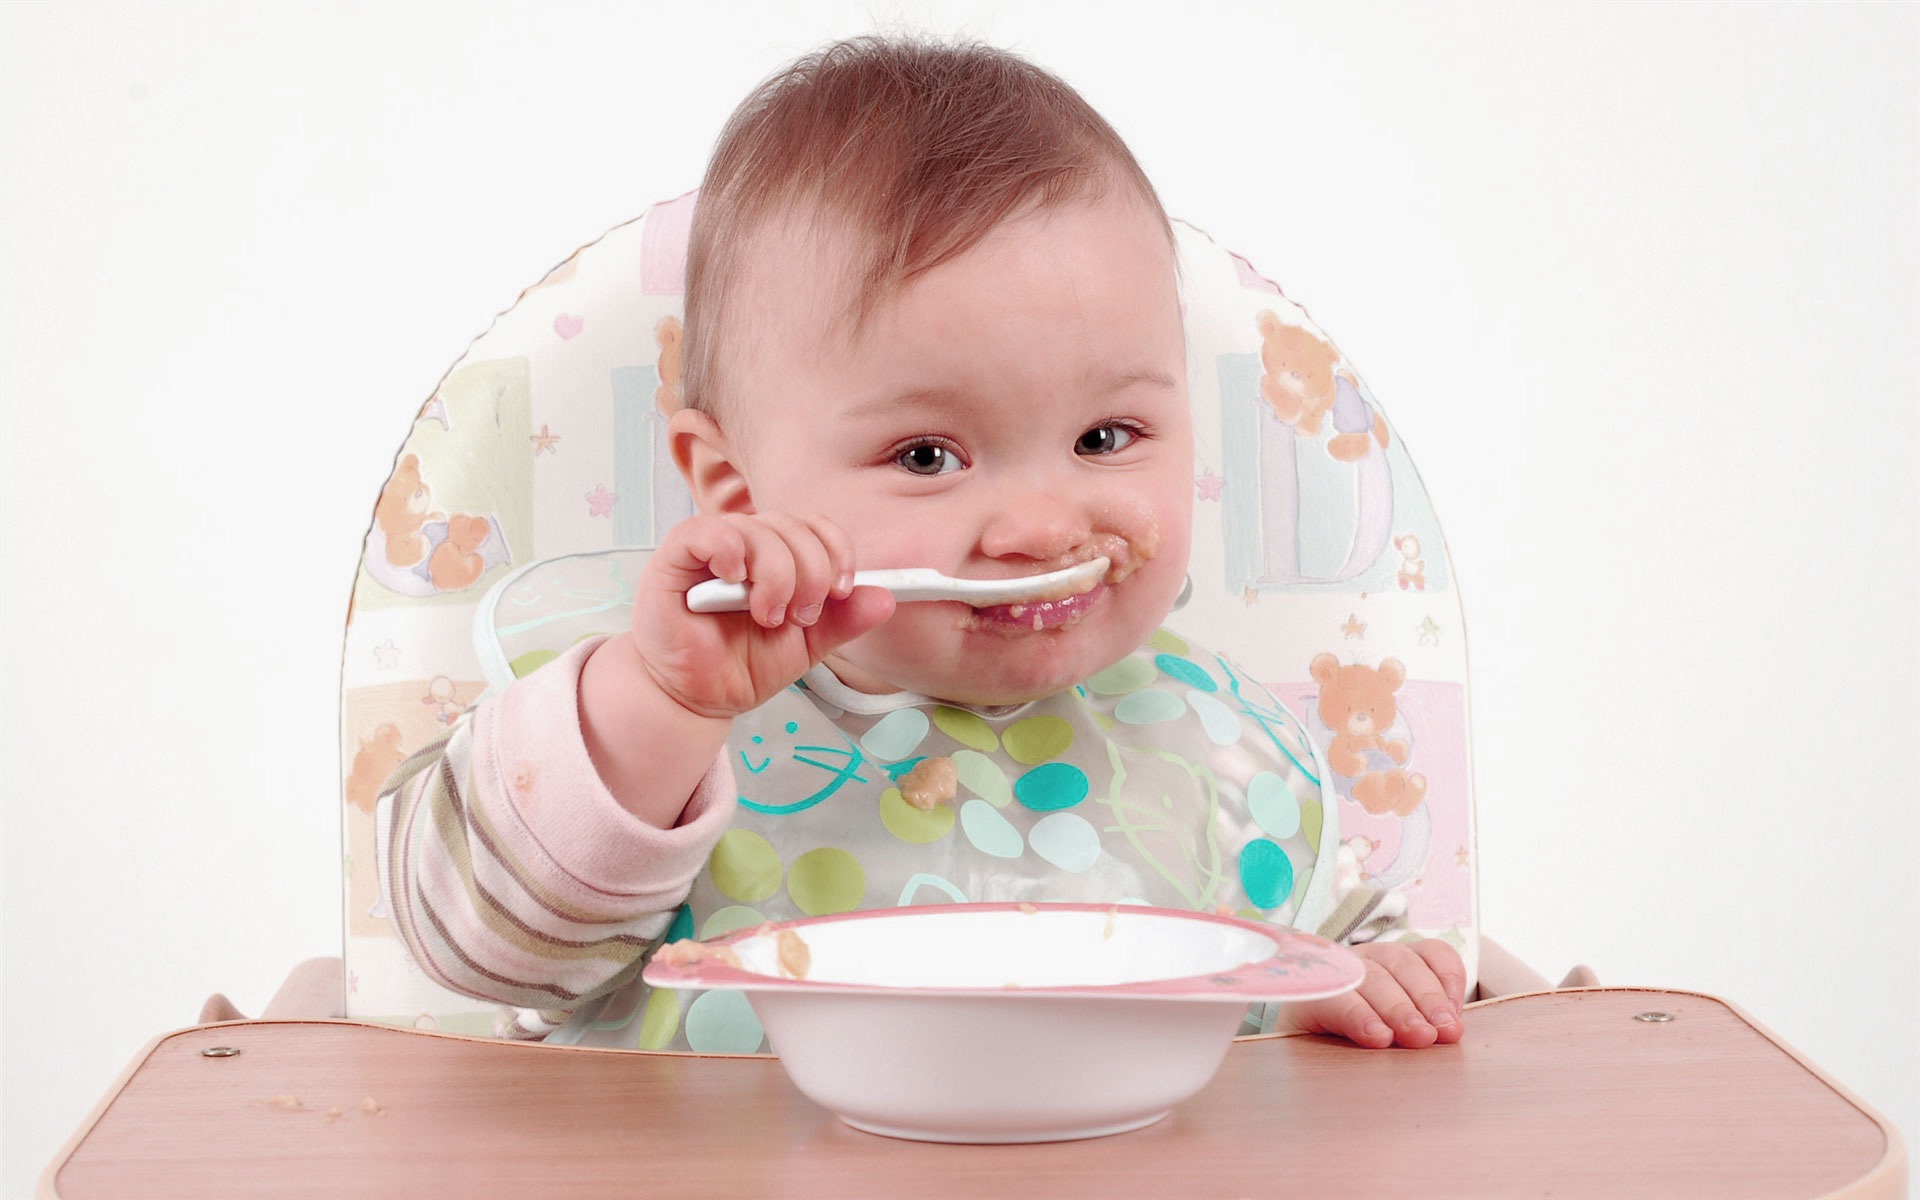 Cute baby self eating funny photo